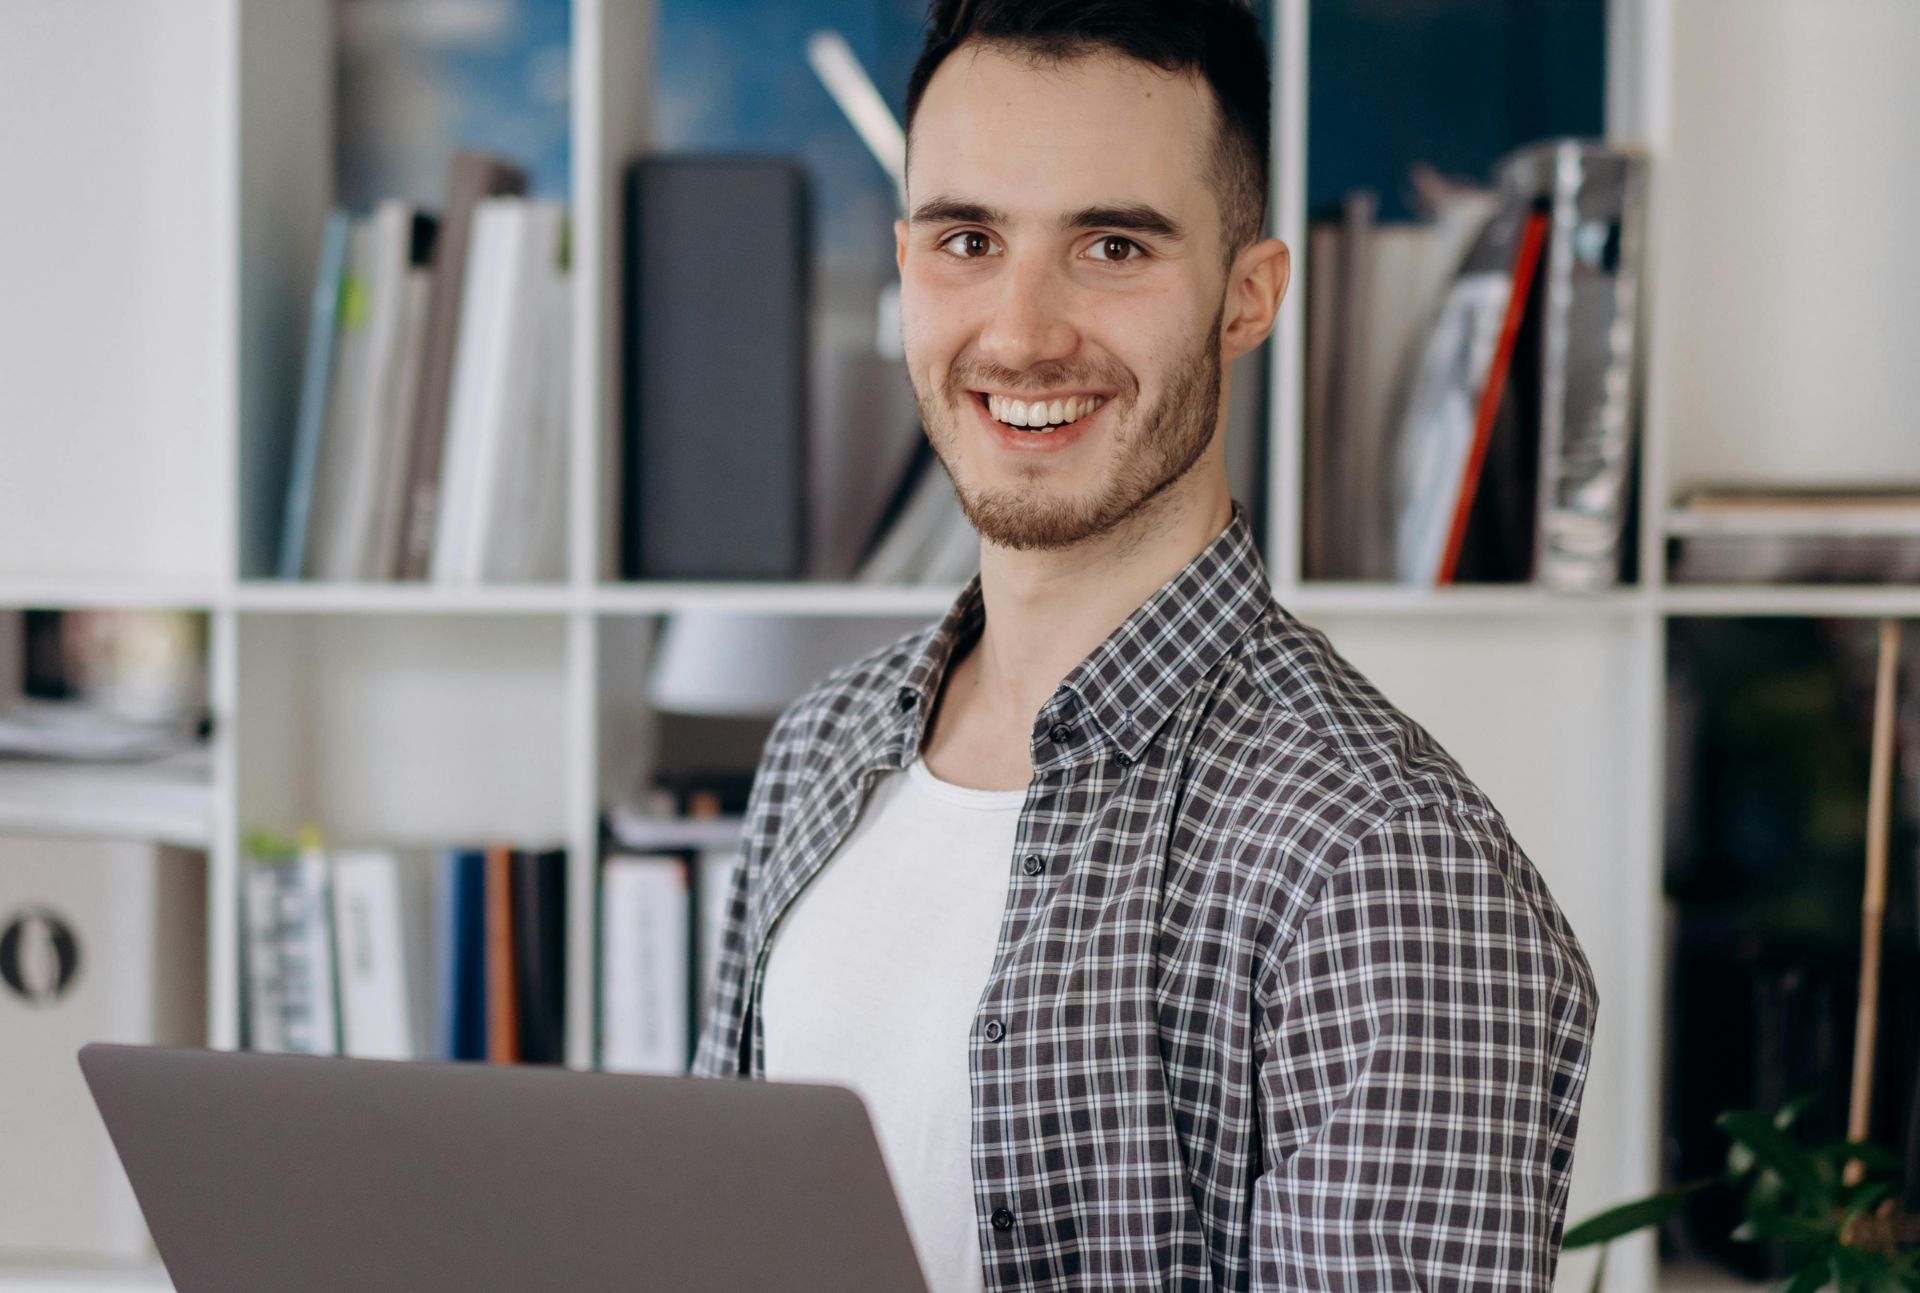 Young European man working as an outsourced software developer, illustrating staff outsourcing services, cost savings, and reduced operational costs. Highlighting the role of outsourced employees and external service providers in effective business strategy.